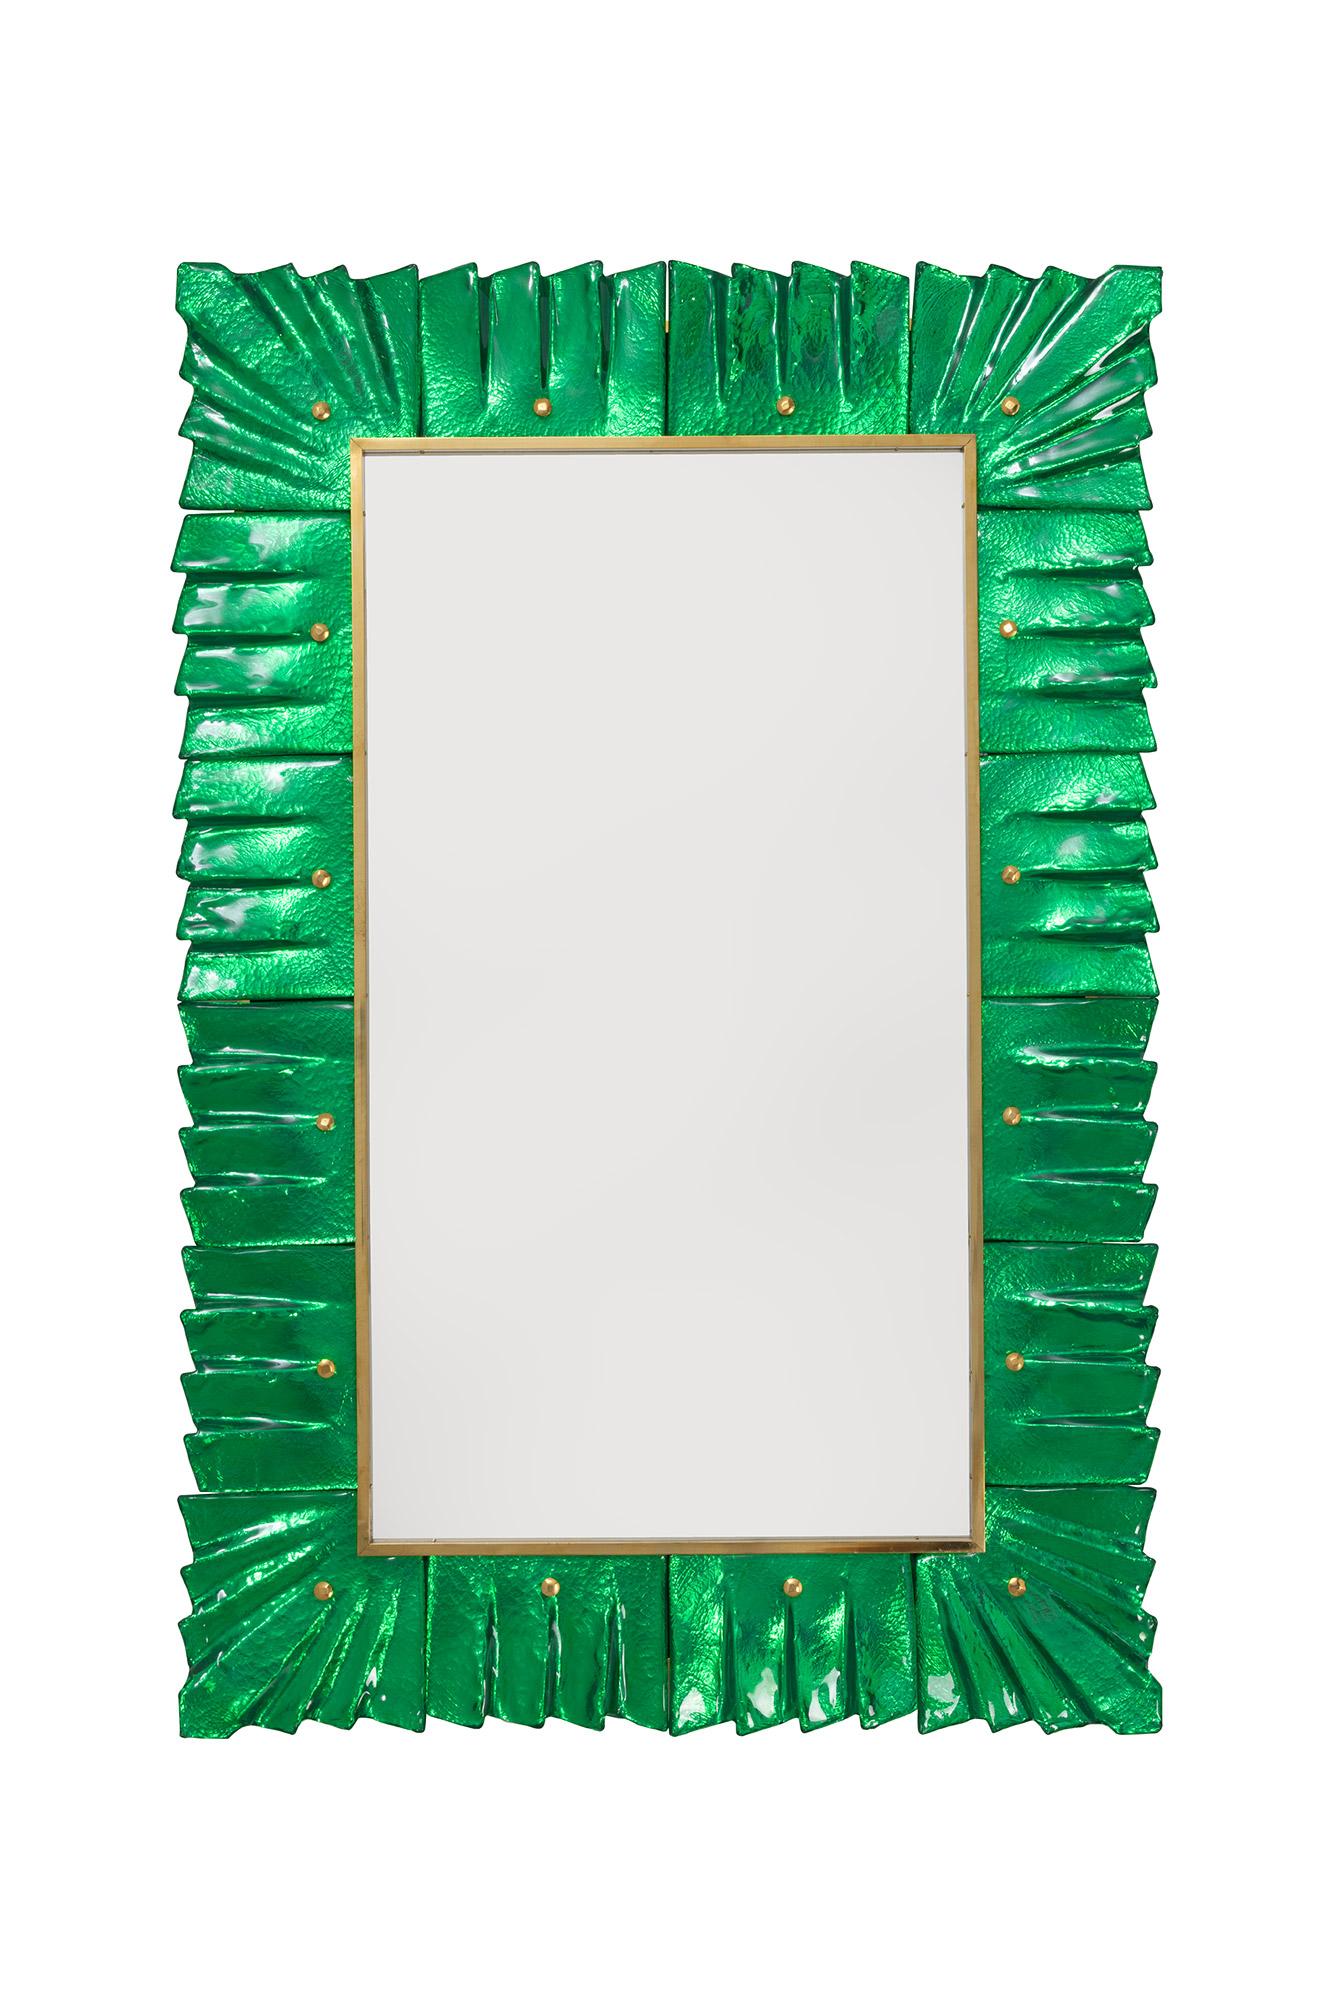 Pair of Murano emerald green glass framed mirrors, in stock.
Rectangular mirror plate surrounded with undulating glass tiles in emerald green color held by brass cabochons. 
Handcrafted by a team of artisans in Venice, Italy. 
Can be easily hung